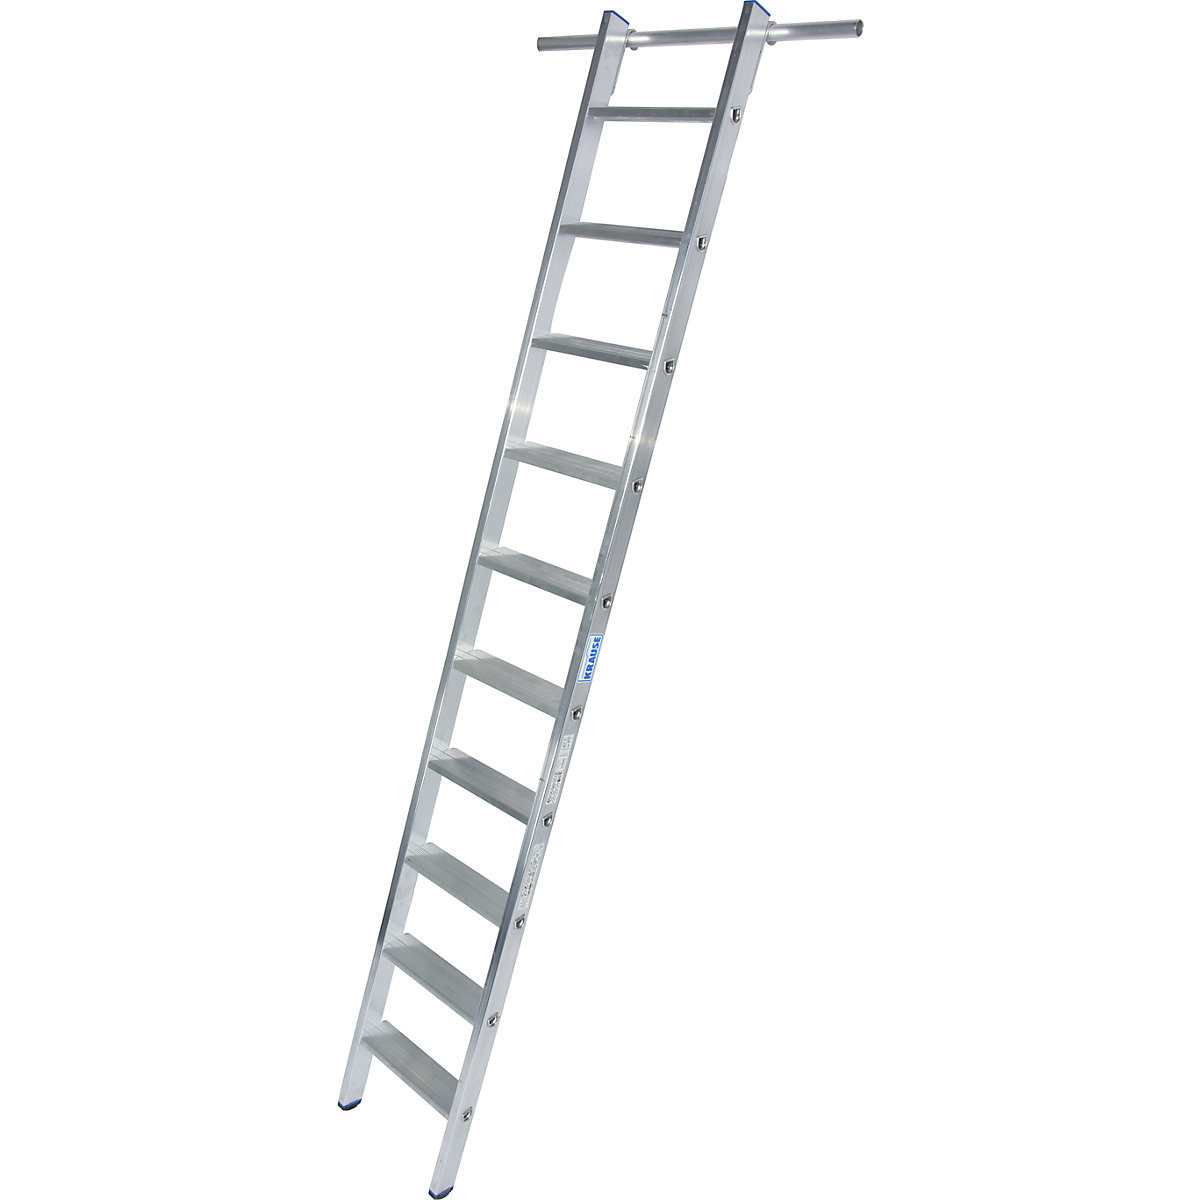 Step shelf ladder – KRAUSE, suspendable, with 1 pair of hooks, 10 steps-6